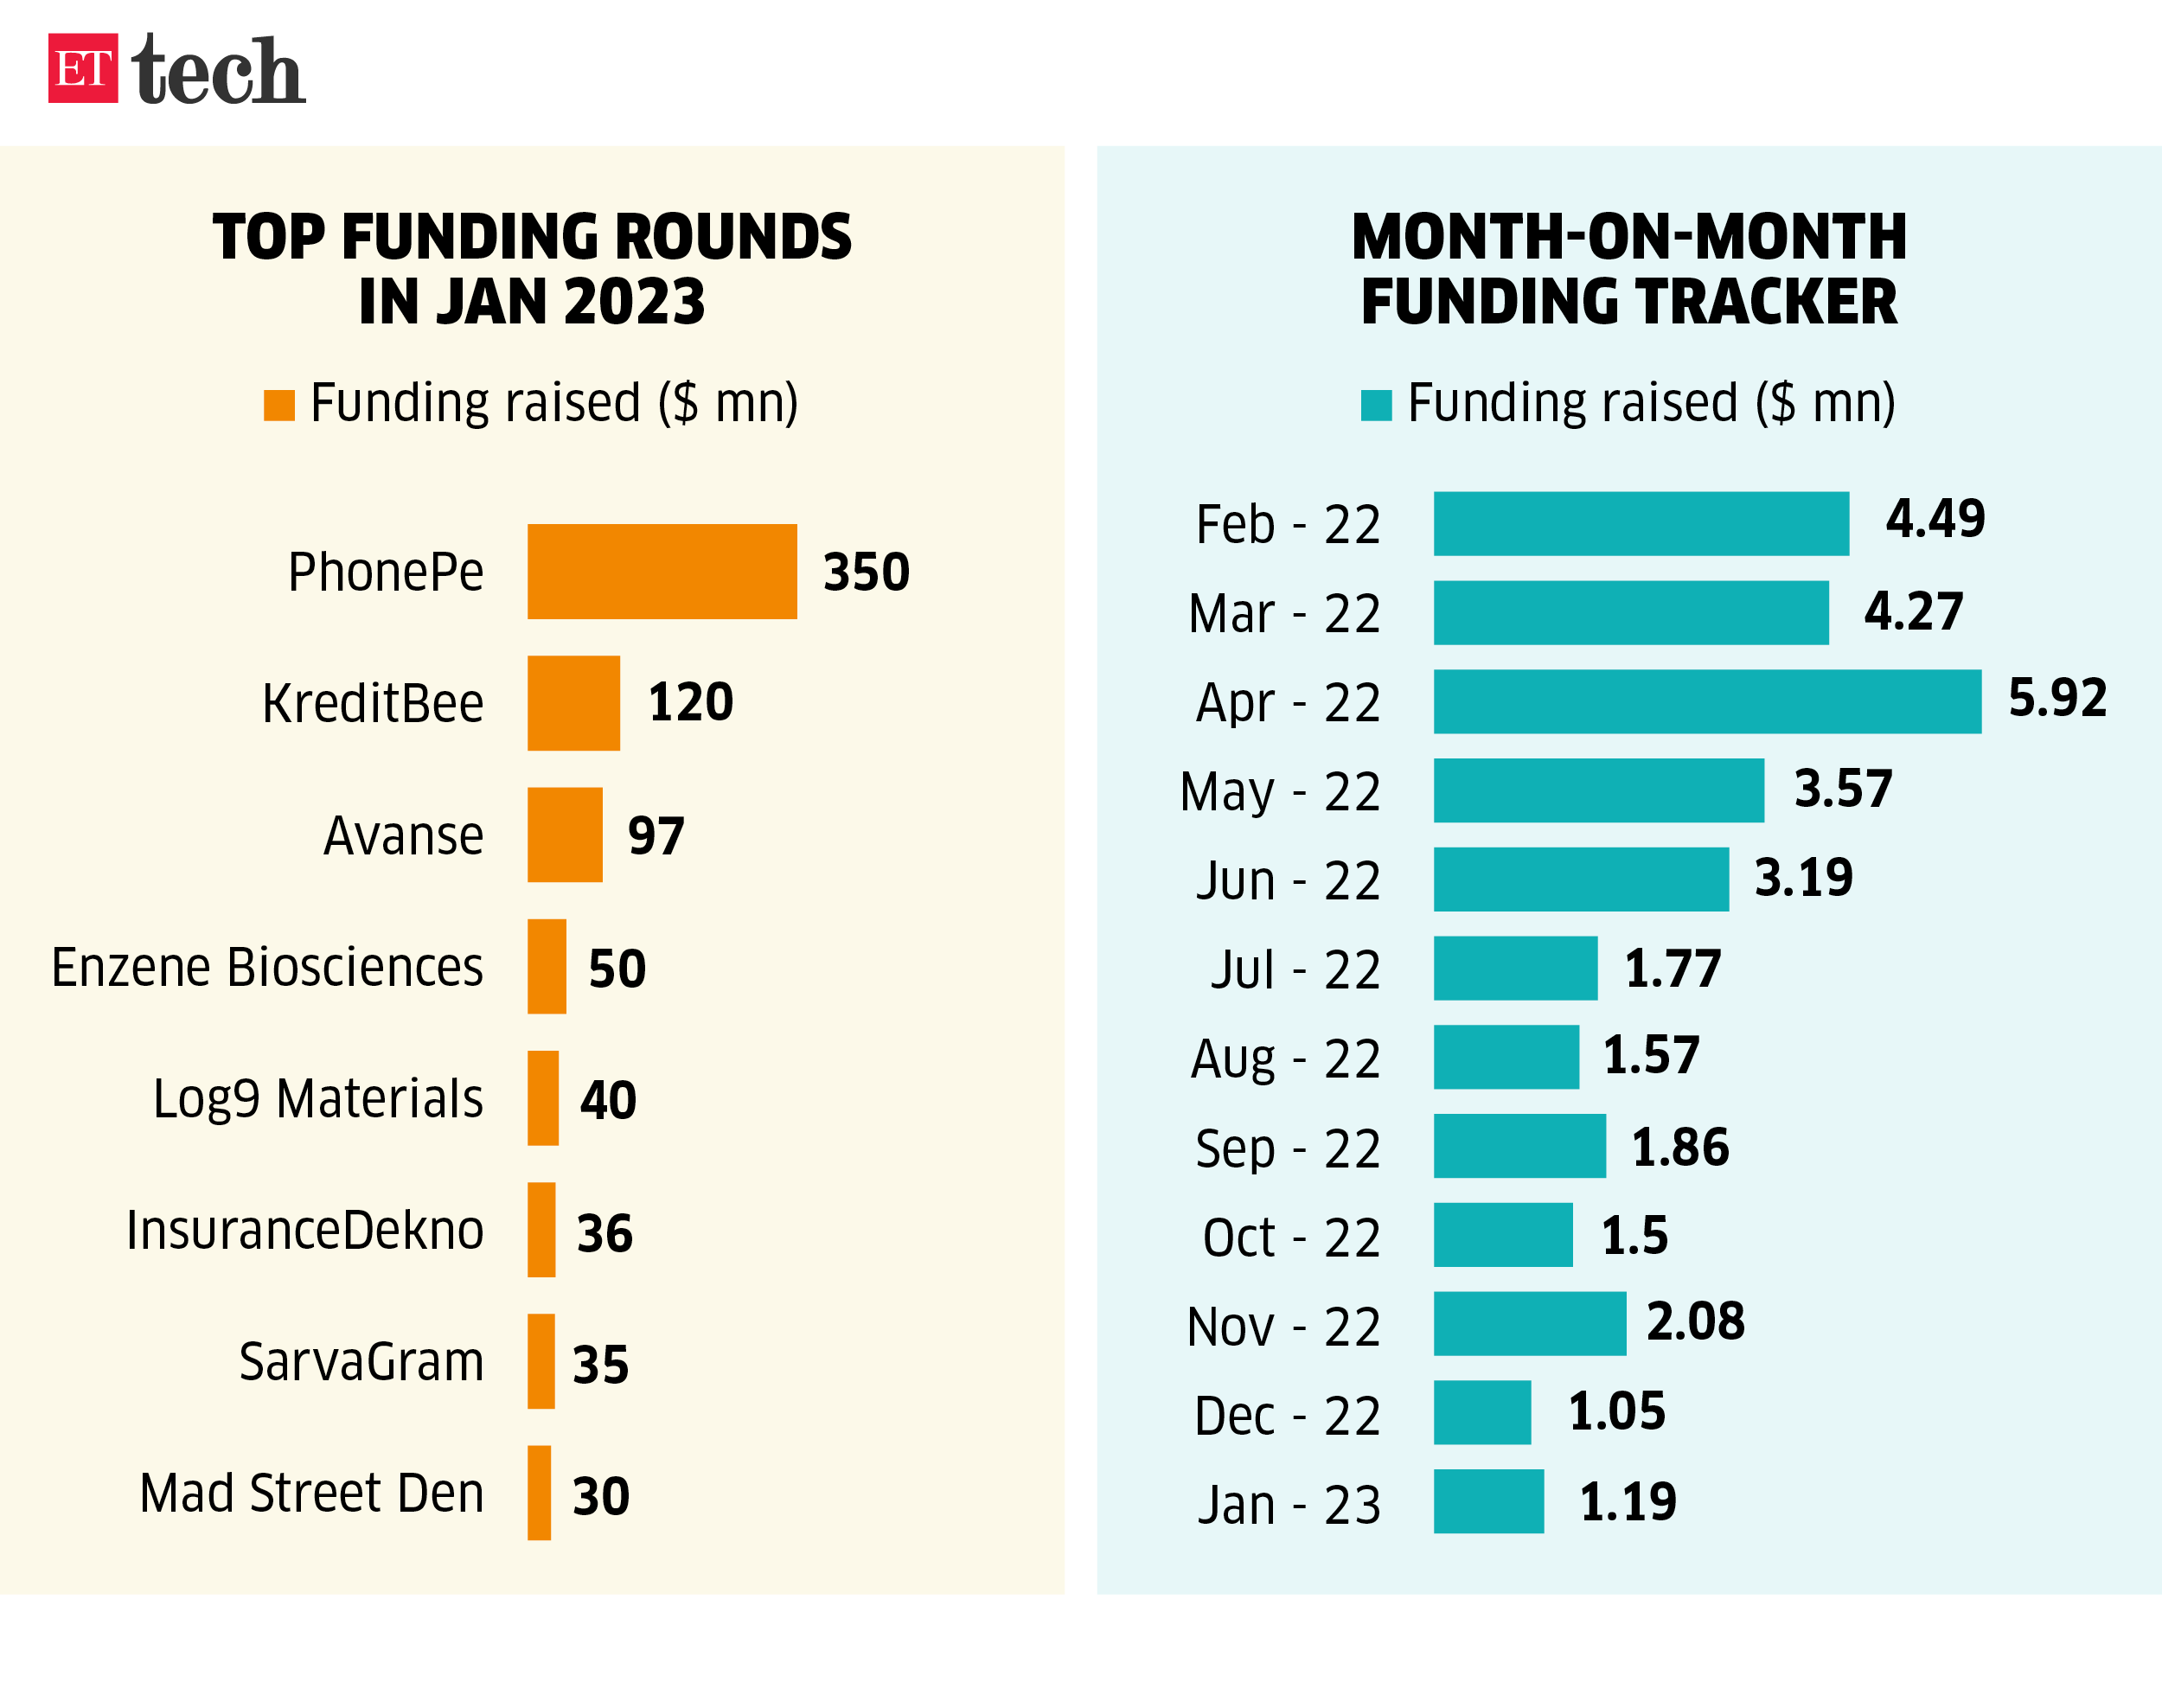 Top funding rounds